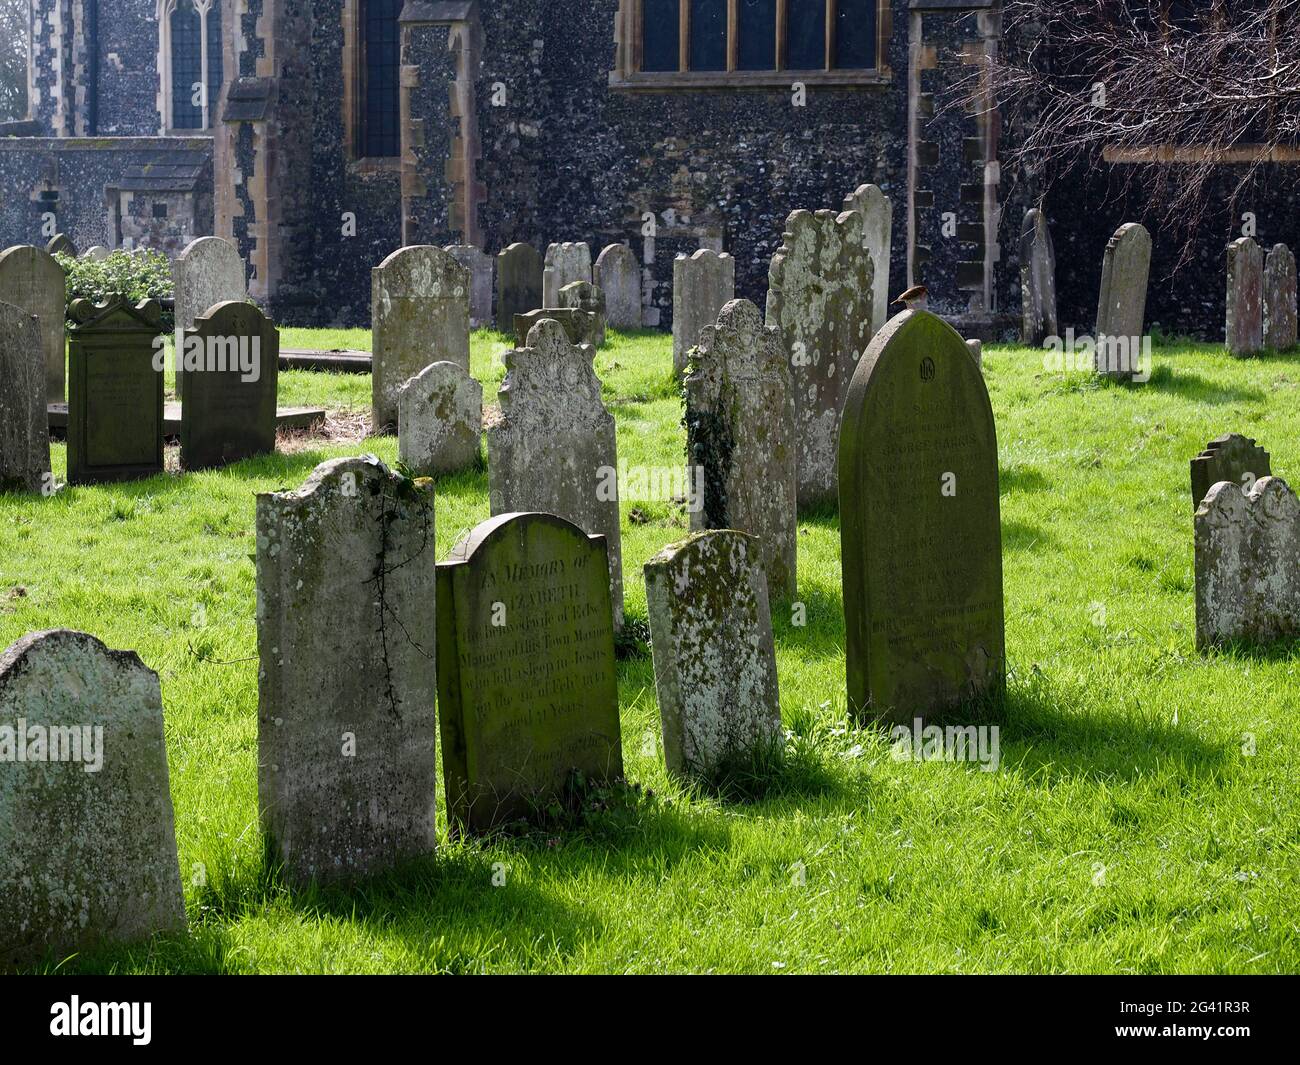 FAVERSHAM, KENT/UK - MARCH 29 : View of St Mary of Charity Church graveyard in Faversham Kent on March 29, 2014 Stock Photo